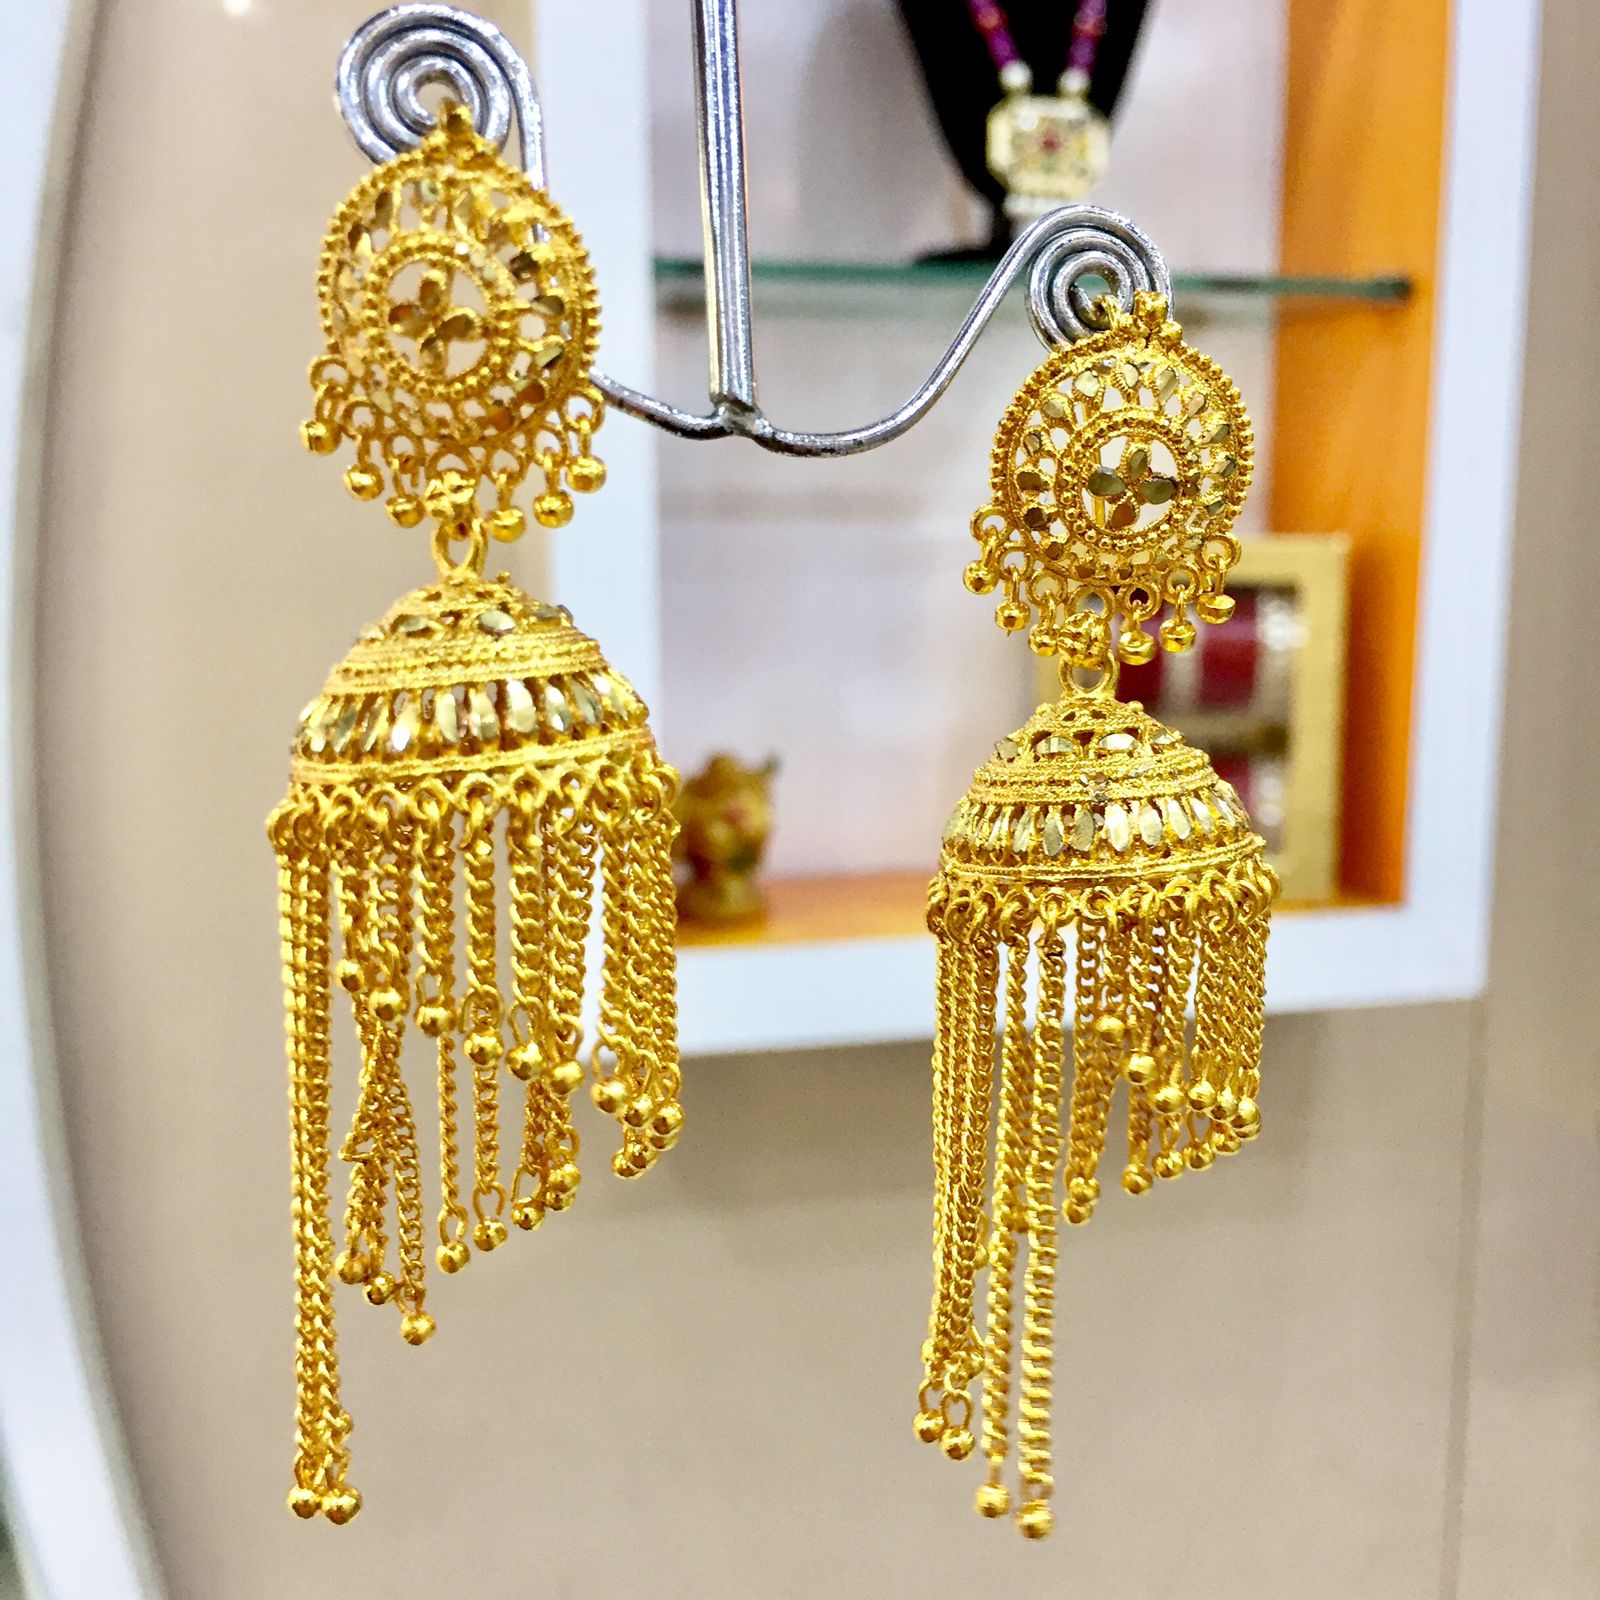 New Gold 18kt Earrings Designs Small Drop Earring – Welcome to Rani Alankar